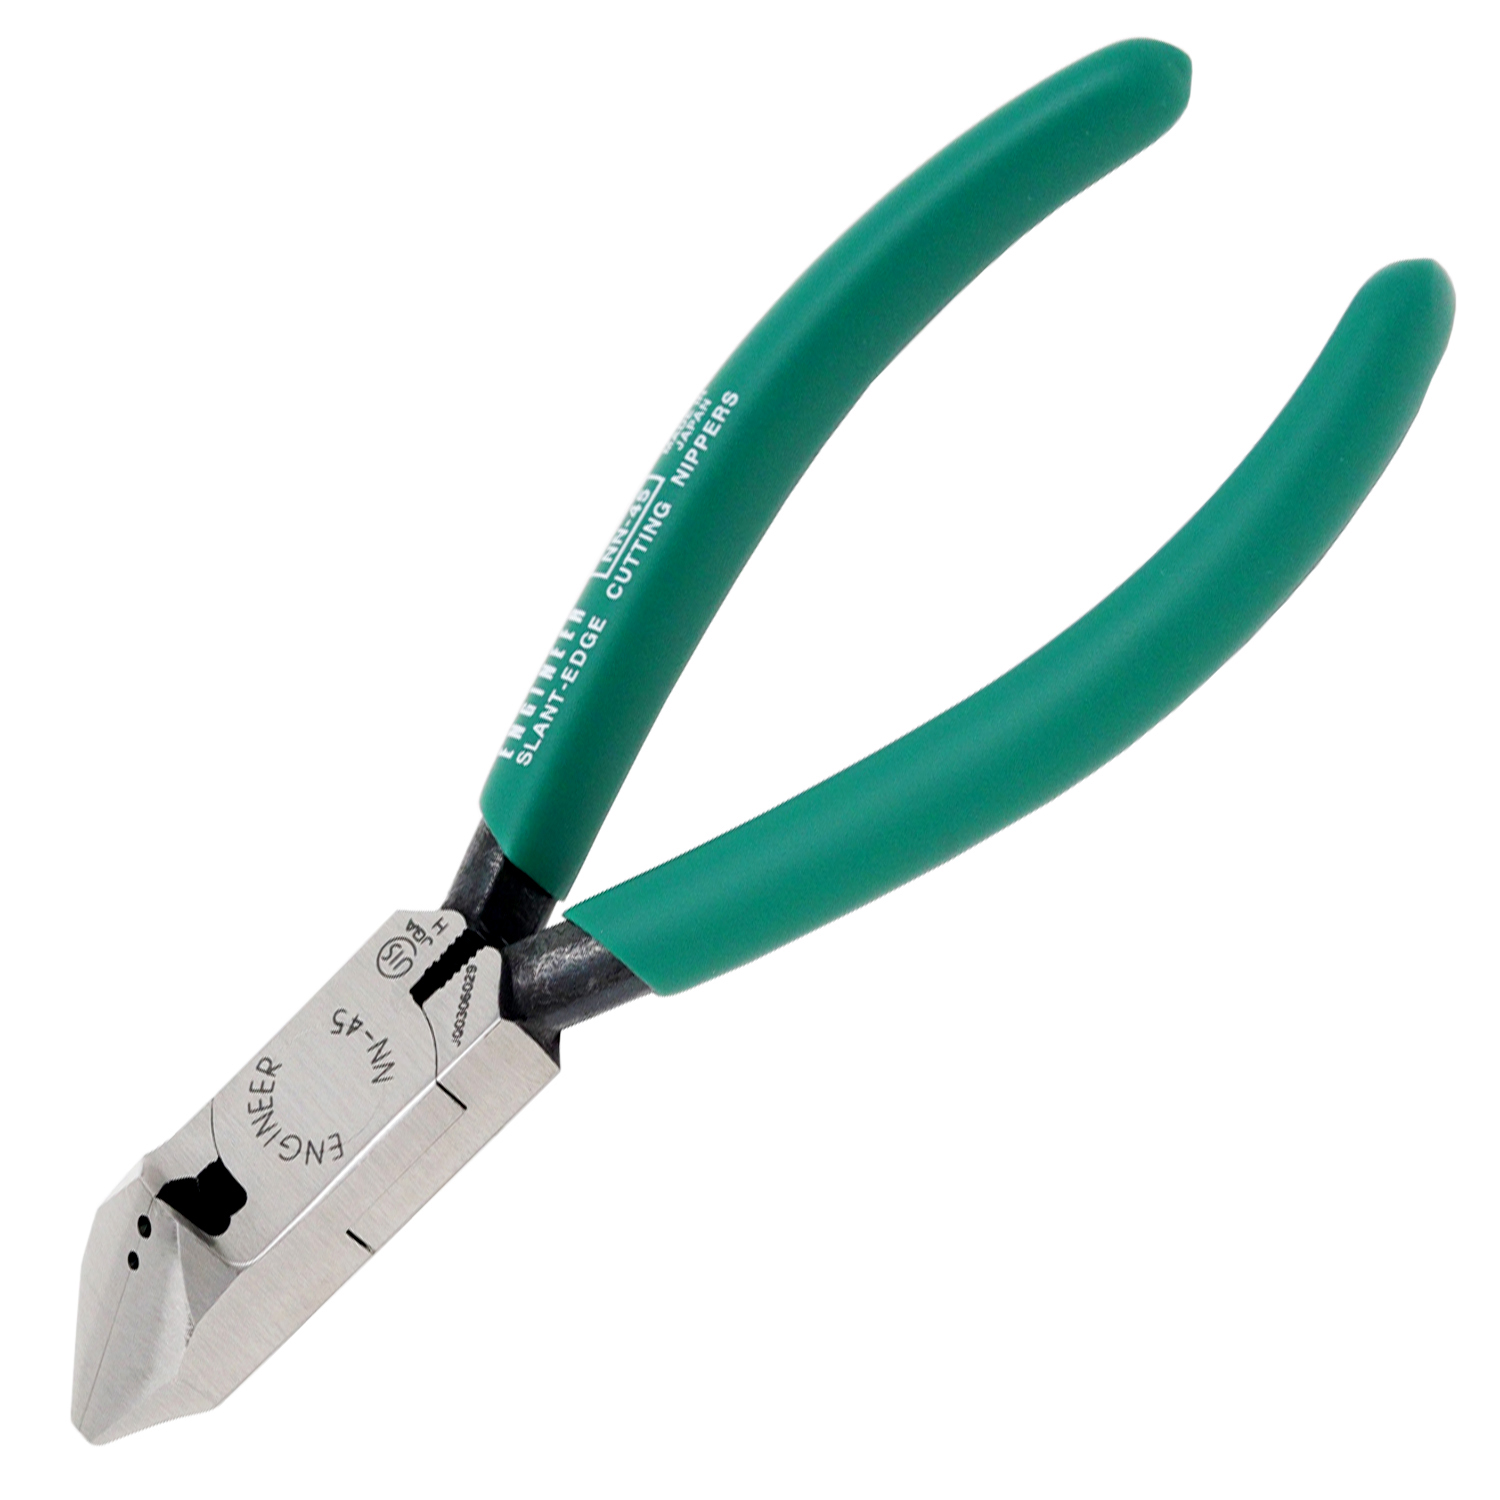 Slant Edge Nippers (with Hole)